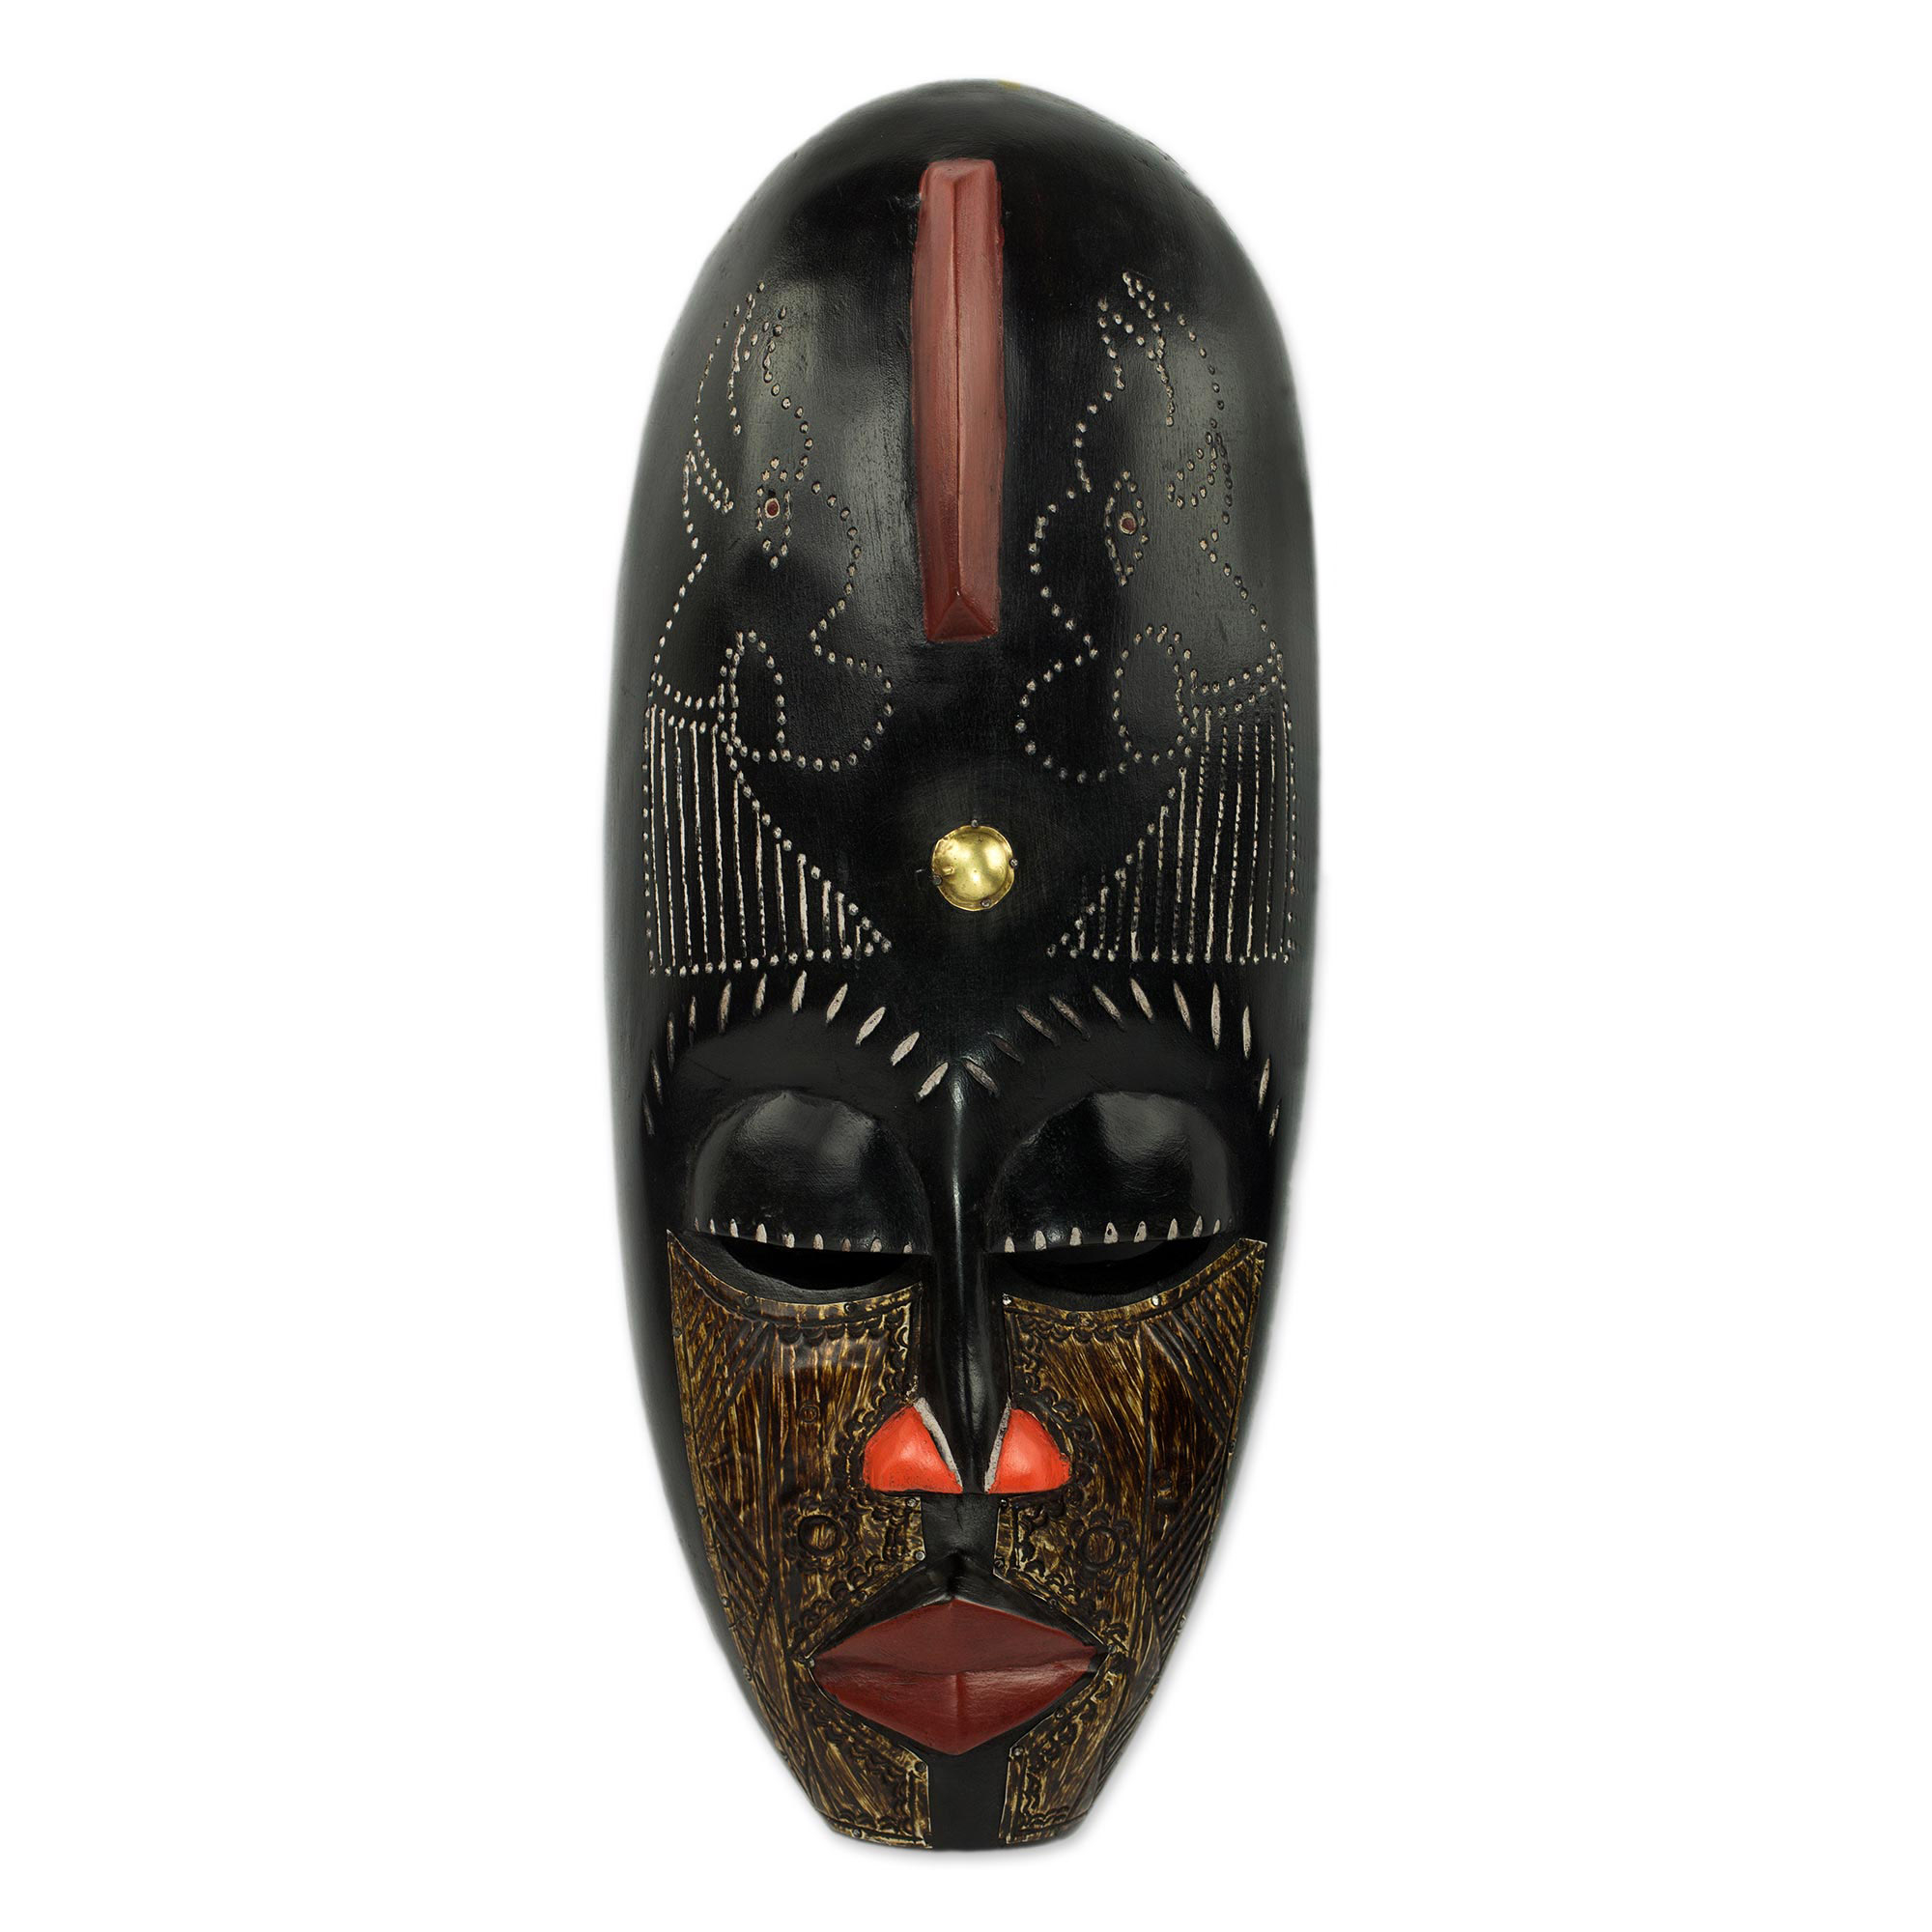 Hand Crafted West African Wood Wall Mask from Ghana - Biombo II | NOVICA